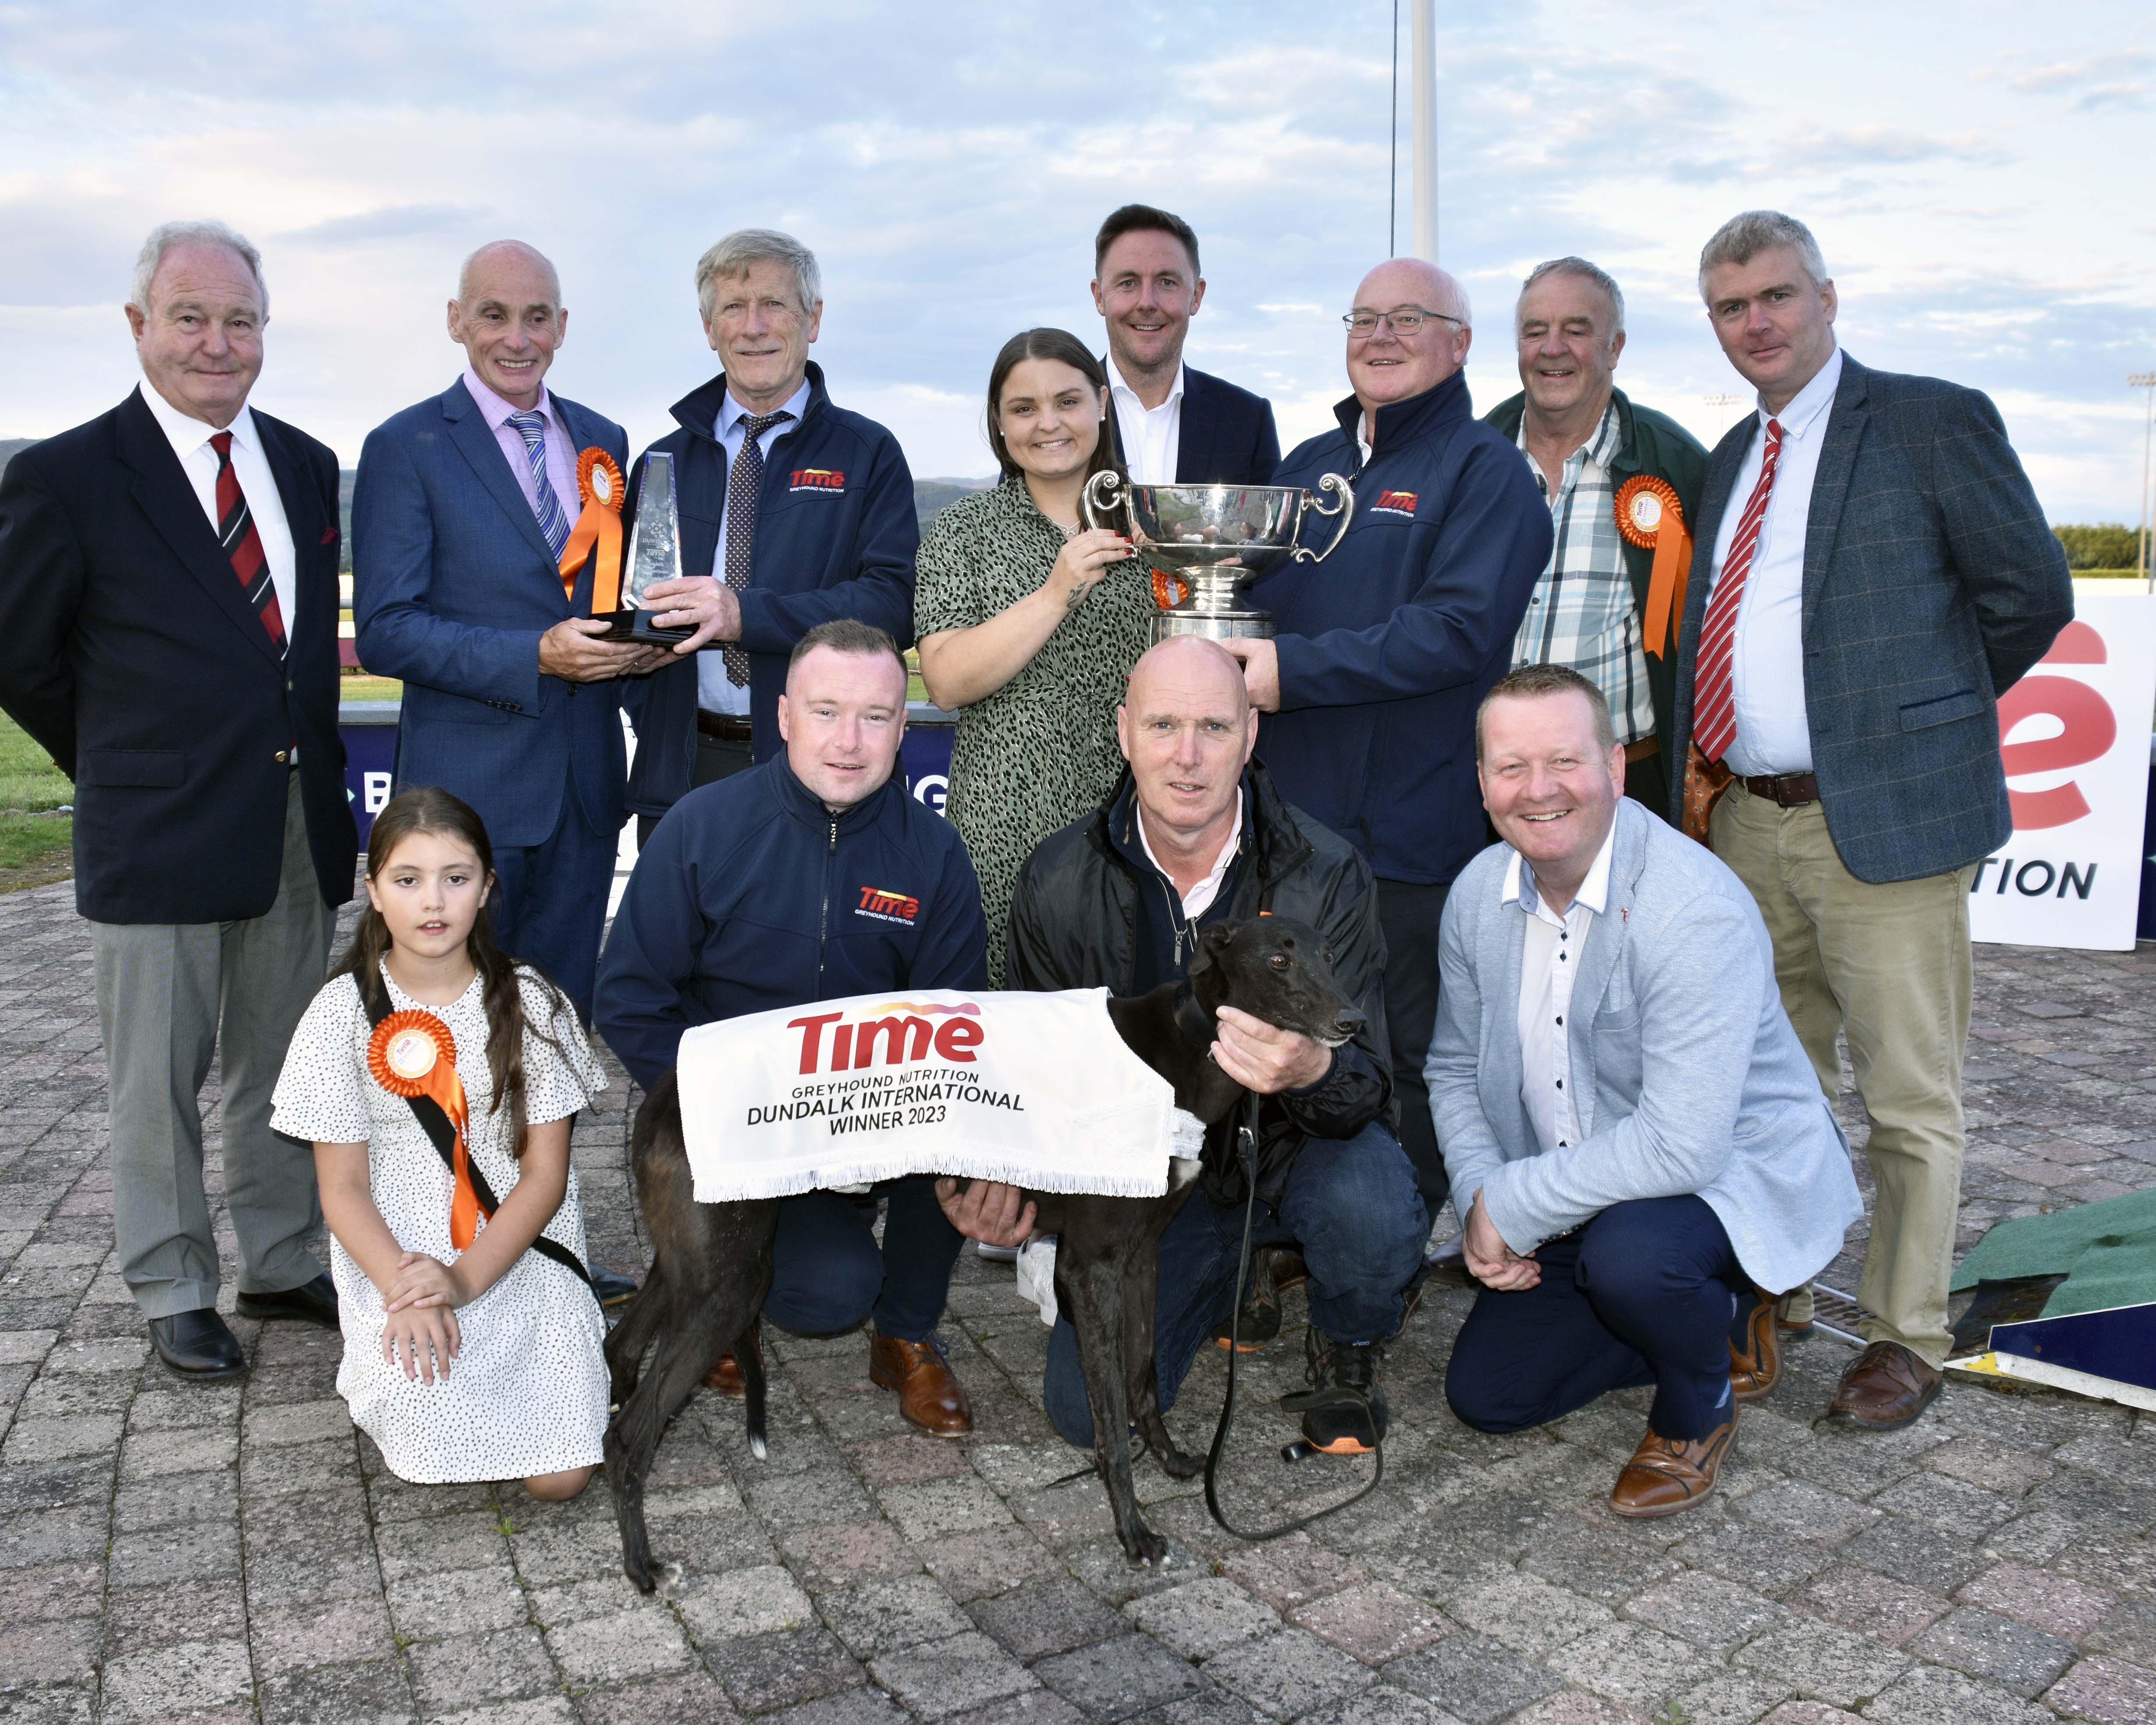 William Rigney presents the trophy to Marissa Molloy after Raha Mofo won the final of the 2023 Time Dundalk International and John Fox presents a replica trophy to Stephen Molloy. Also included are Leon Blanch Chief Commercial Officer GRI, Derek Frehill Director Of Racing GRI, Pat Herbert GRI, Shane Rigney Time, trainer Murt Leahy, handler Stephen Dunne and Leo McAuley Chairman Dundalk Track.  